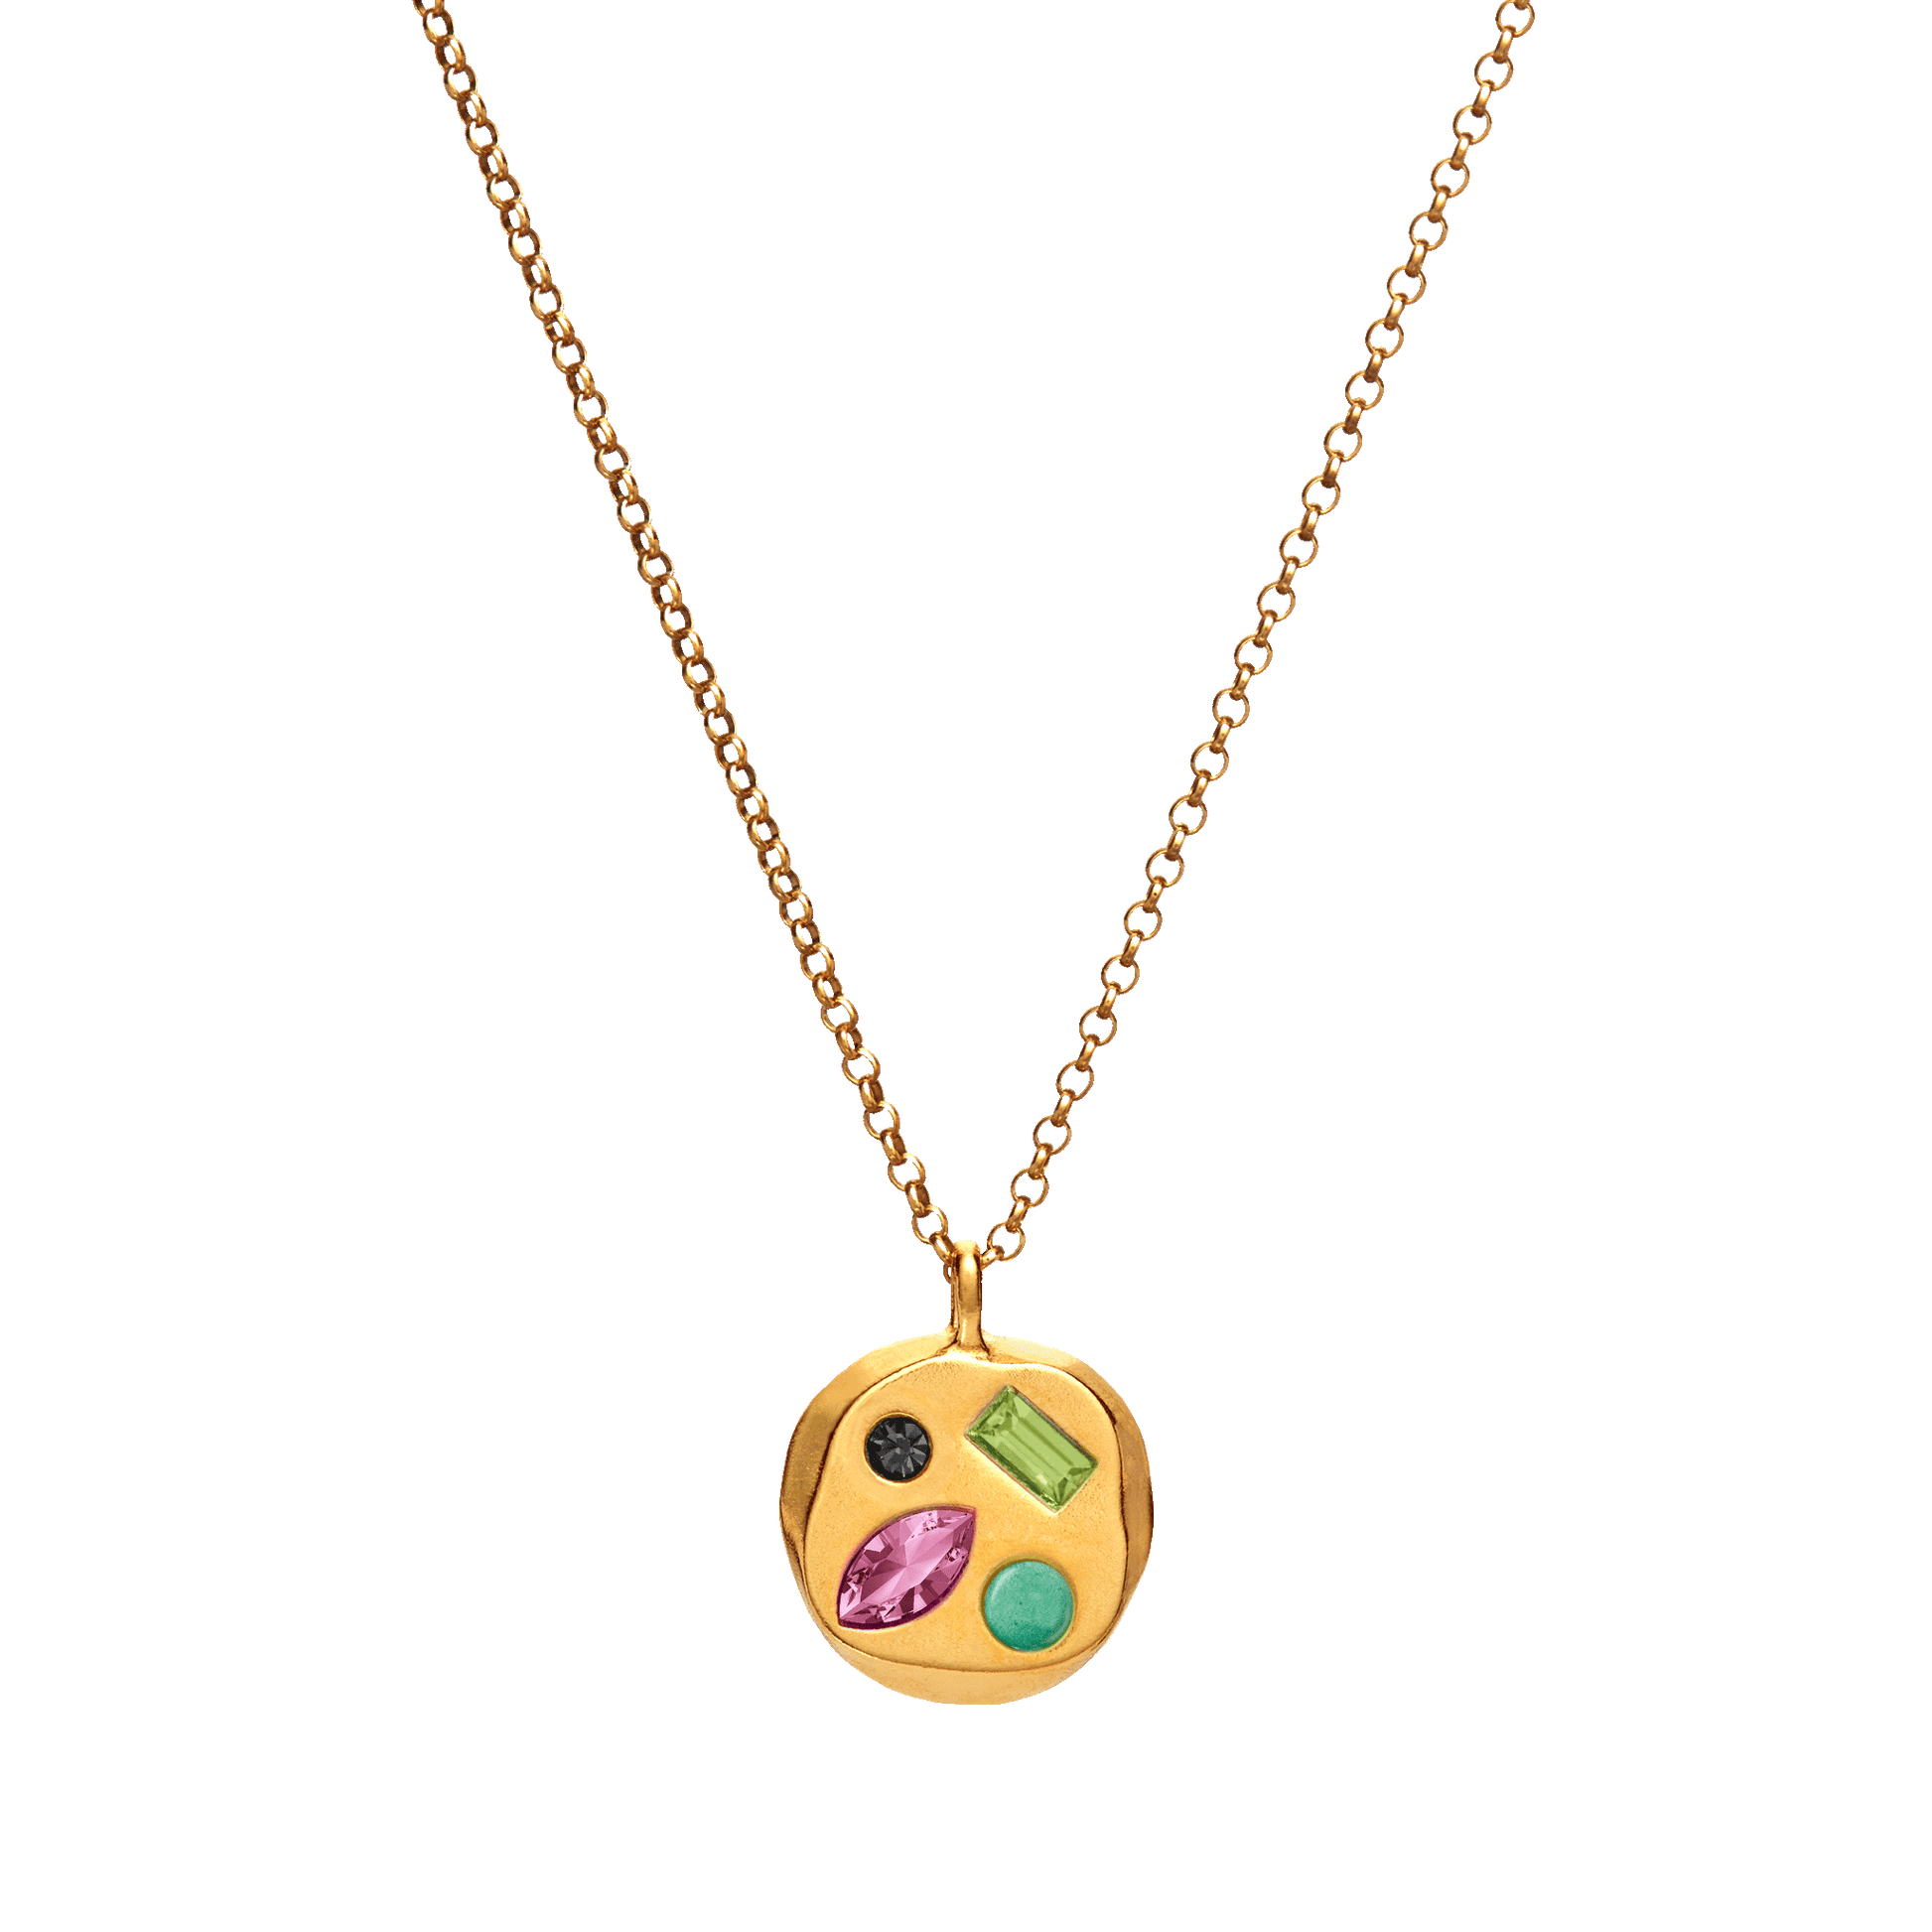 The October Fifth Pendant